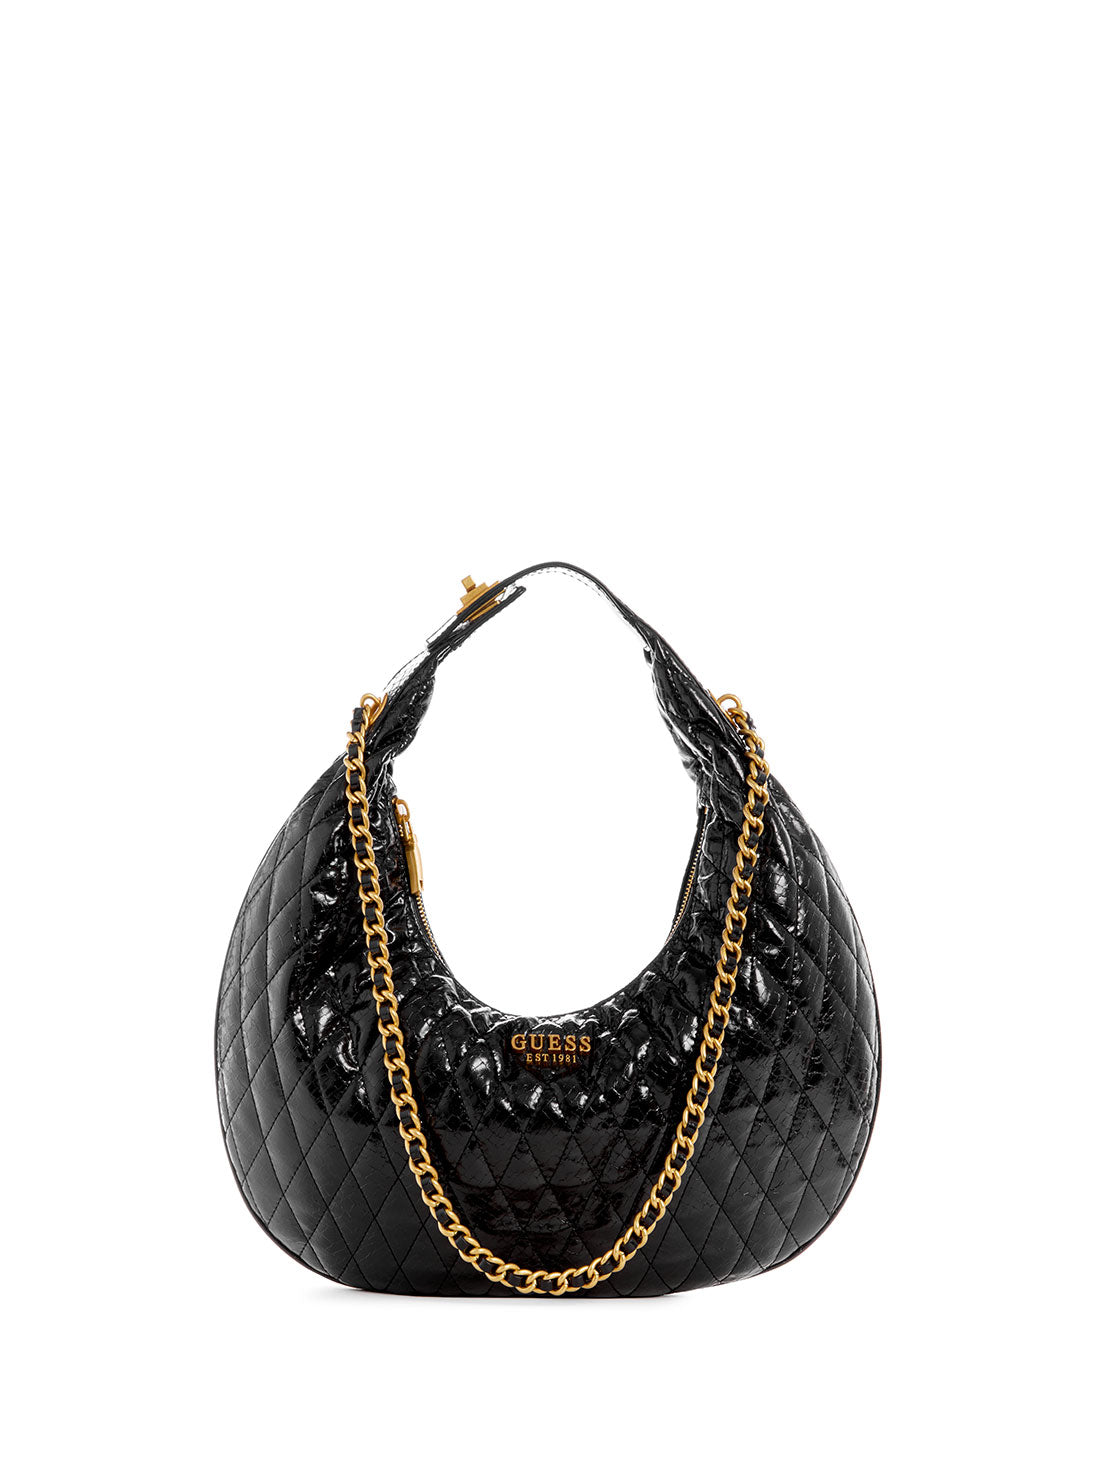 TED BAKER LEATHER Hobo Style Bag in Black Size M $250.00 - PicClick AU